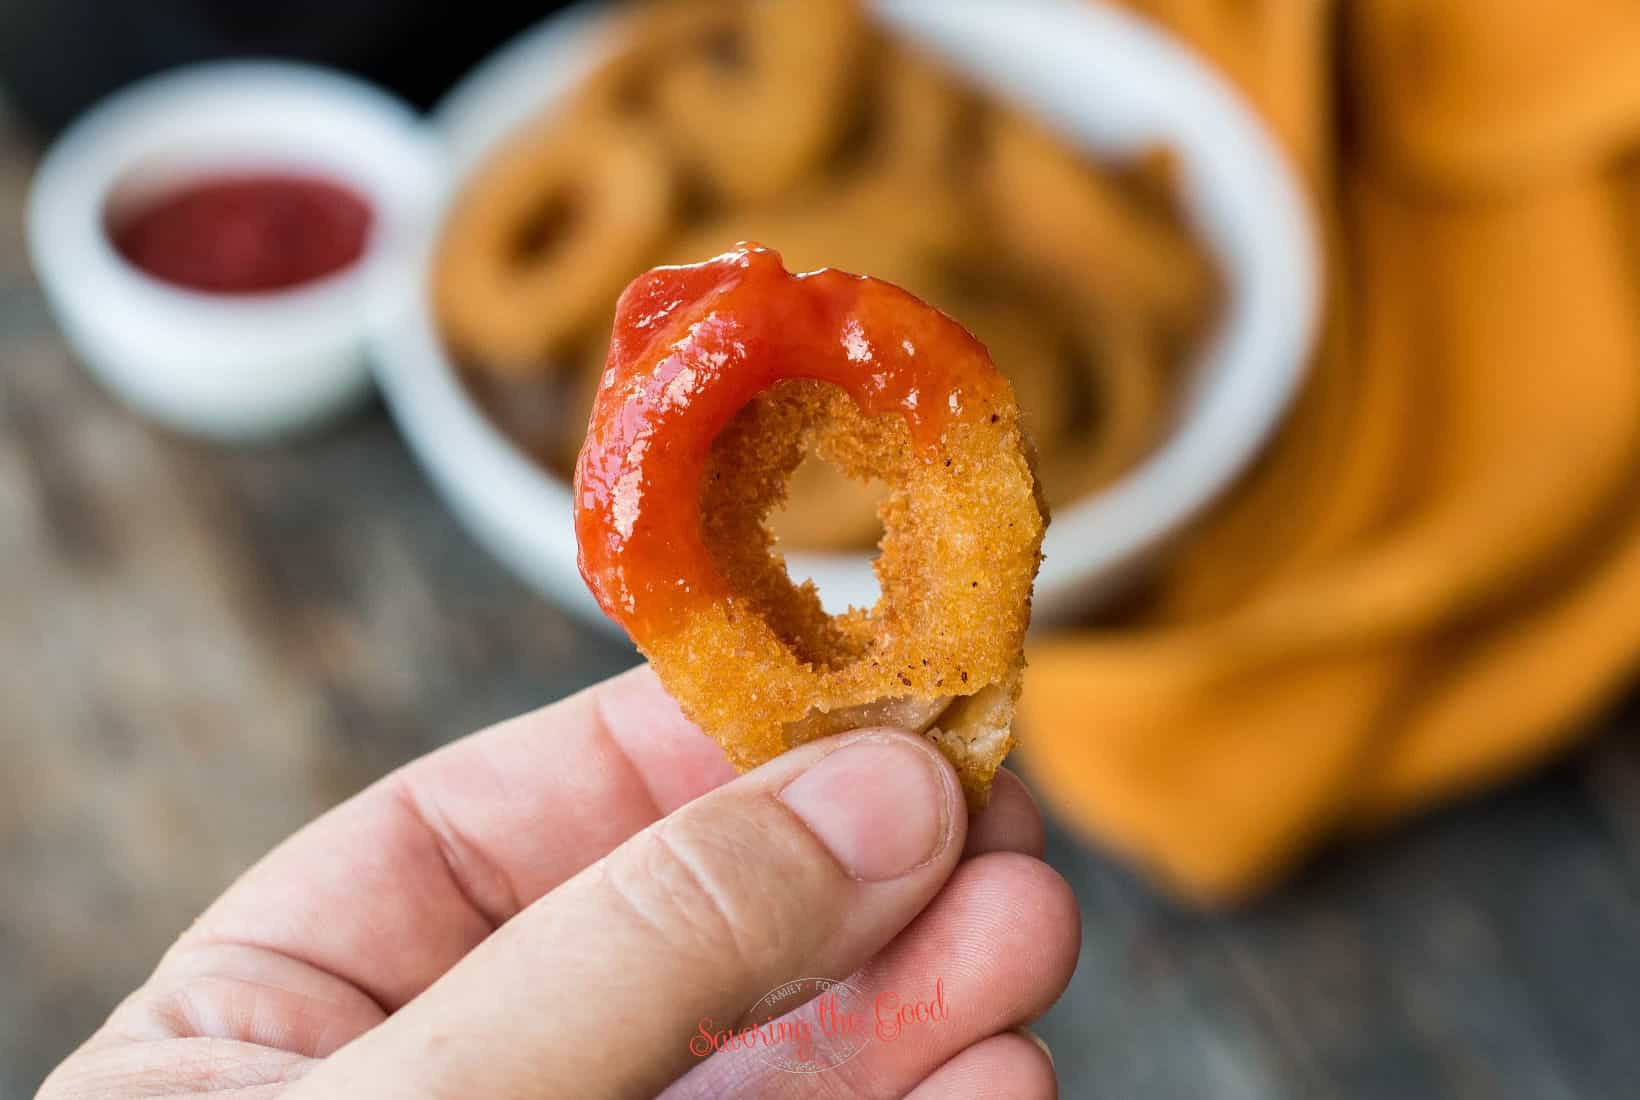 small onion ring with a dip of ketchup being held in a hand.